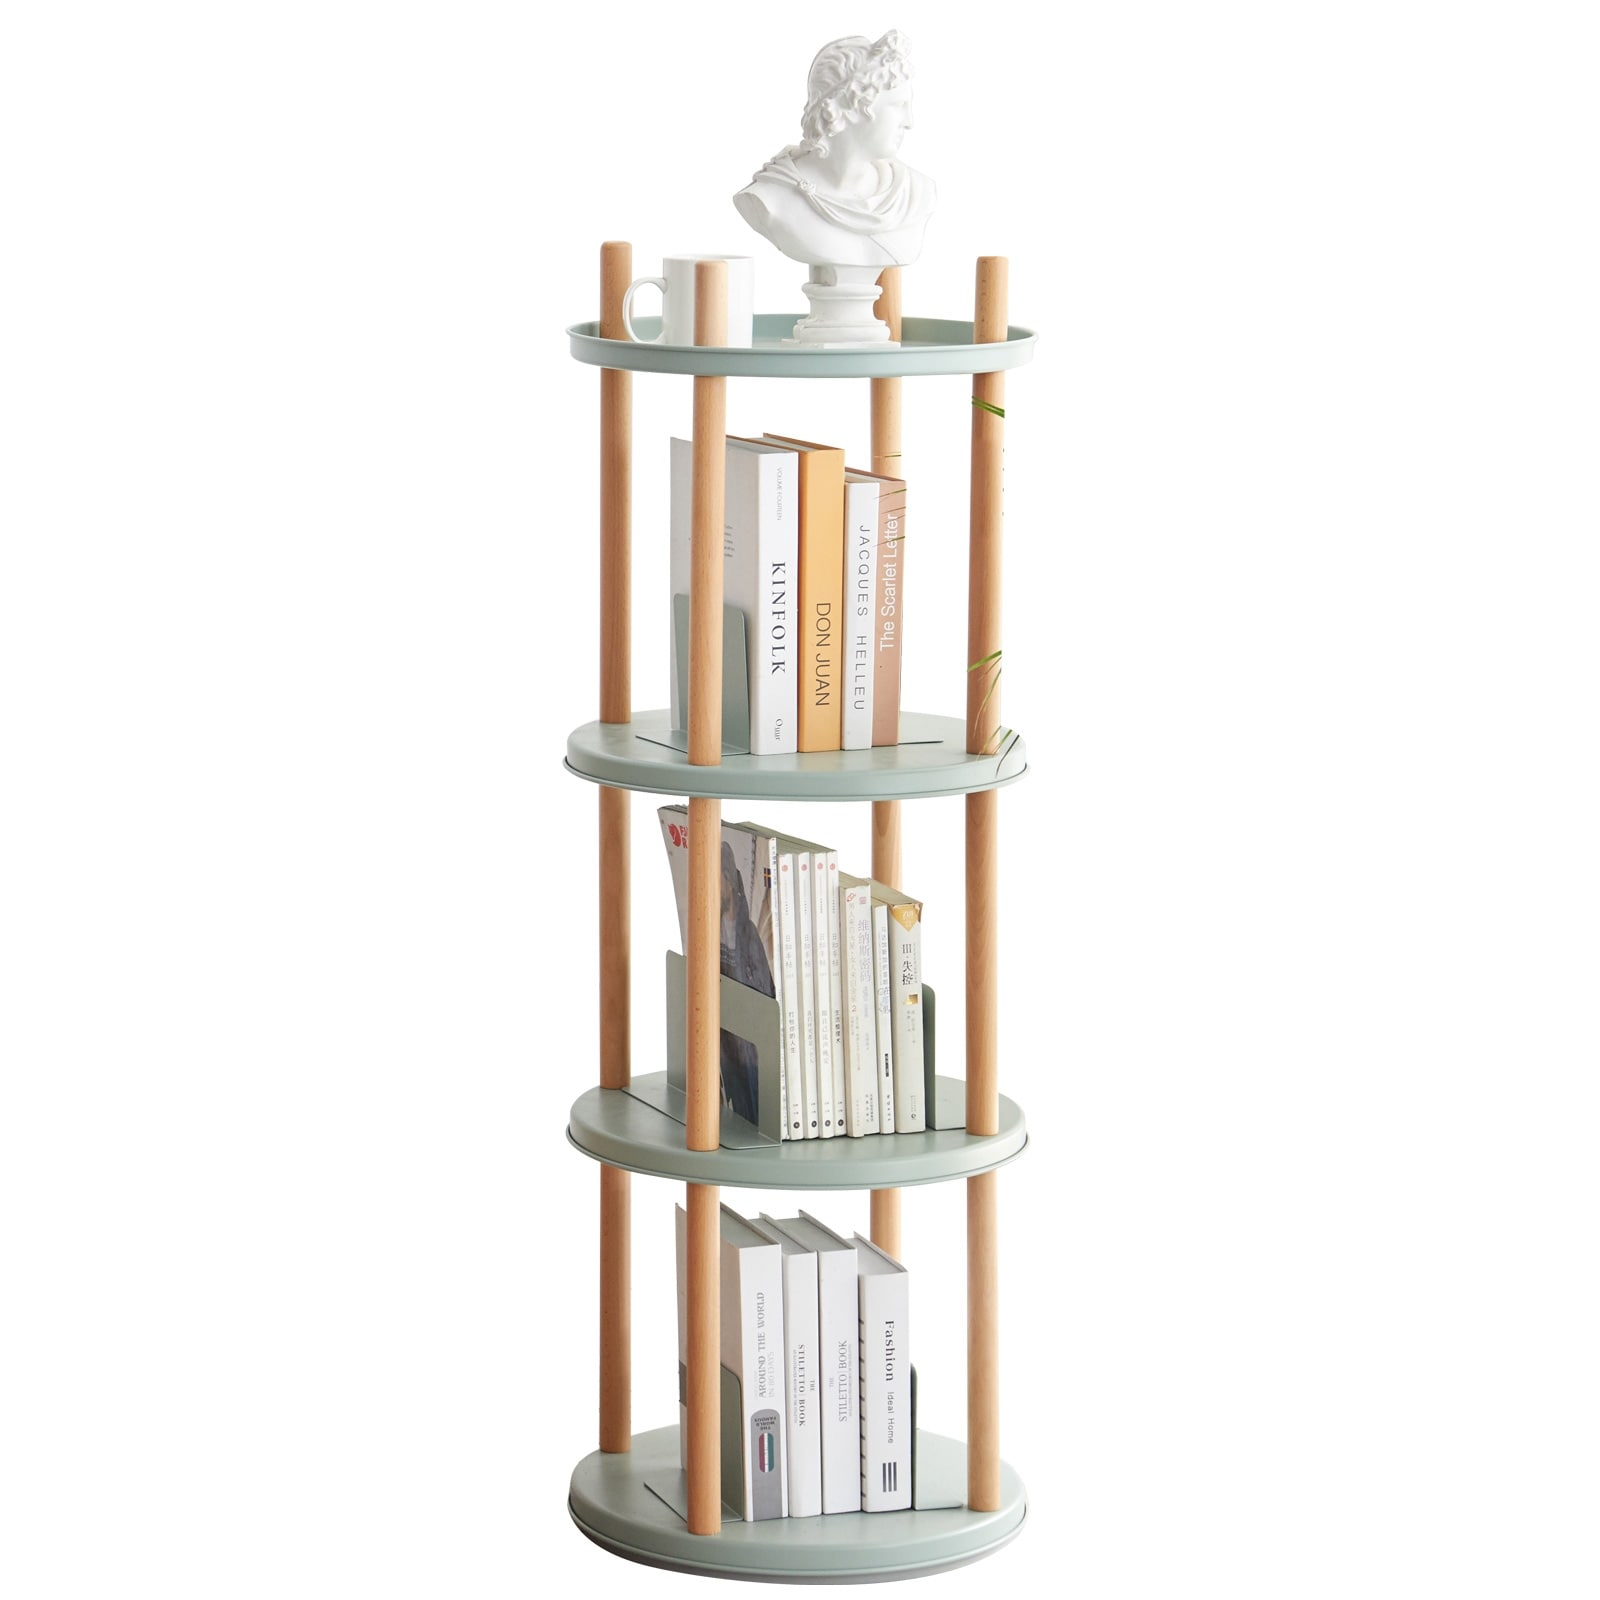 https://ak1.ostkcdn.com/images/products/is/images/direct/55afc821ff793e4a6335f9575d57153fa7175b88/Storage-Shelf%2C360%C2%B0Rotating-Bookshelf%2C4-Tier-Bookcase-Large-Capacity-Storage-Space%2CMultifunctional-Storage-Rack-Kitchen.jpg